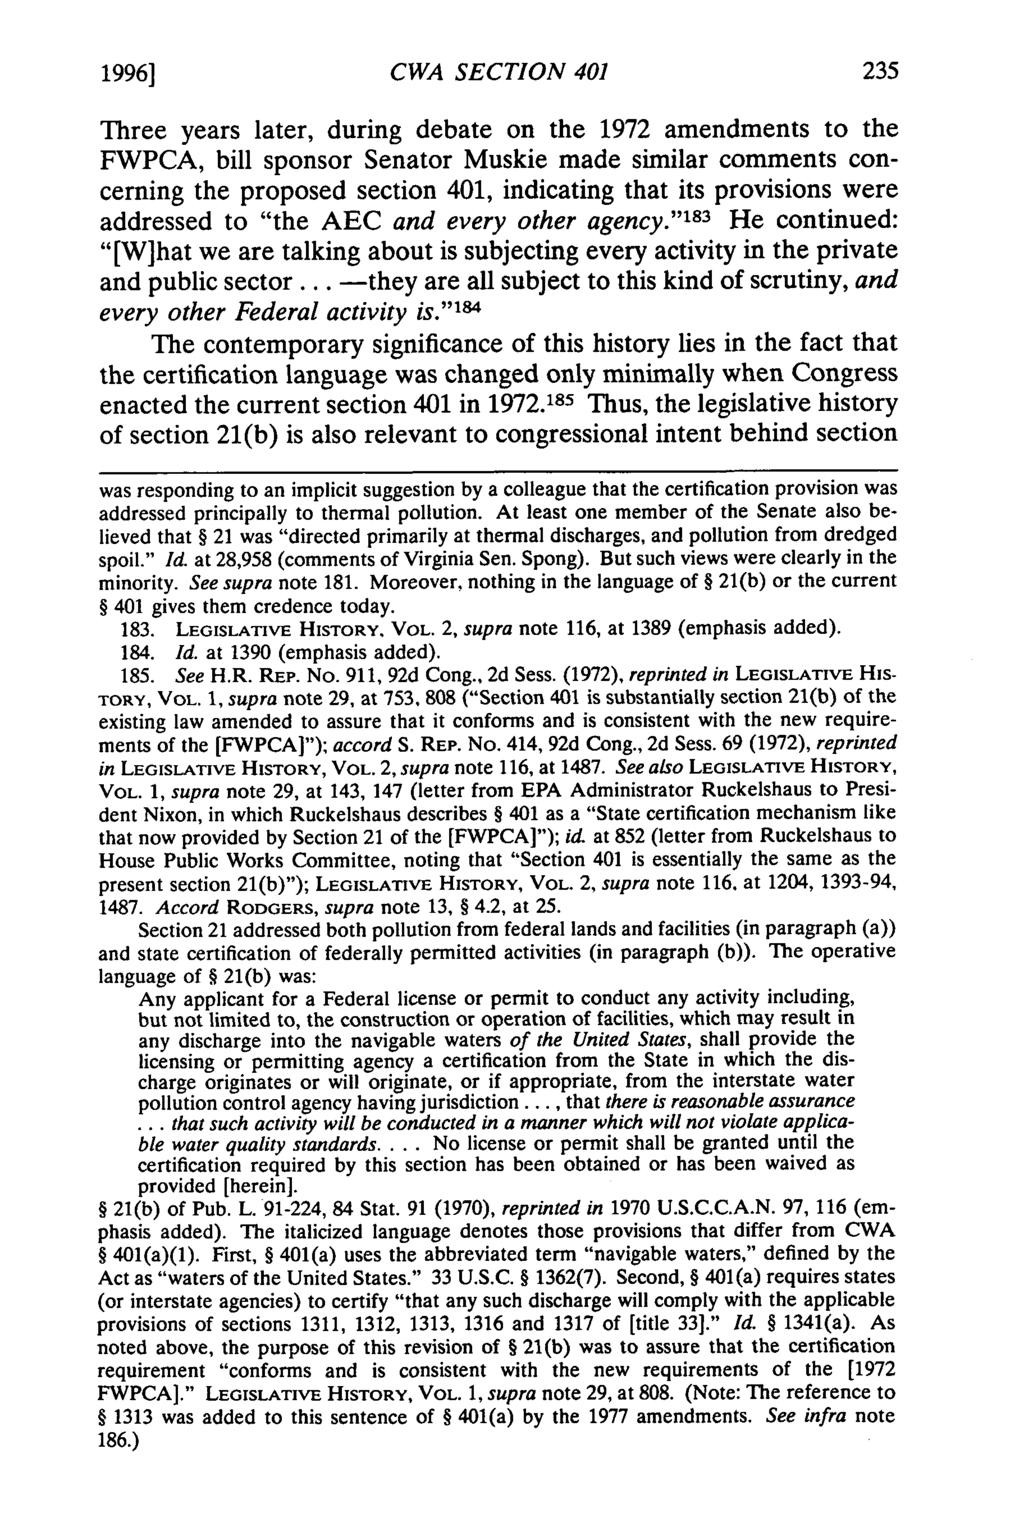 1996] CWA SECTION 401 Three years later, during debate on the 1972 amendments to the FWPCA, bill sponsor Senator Muskie made similar comments concerning the proposed section 401, indicating that its